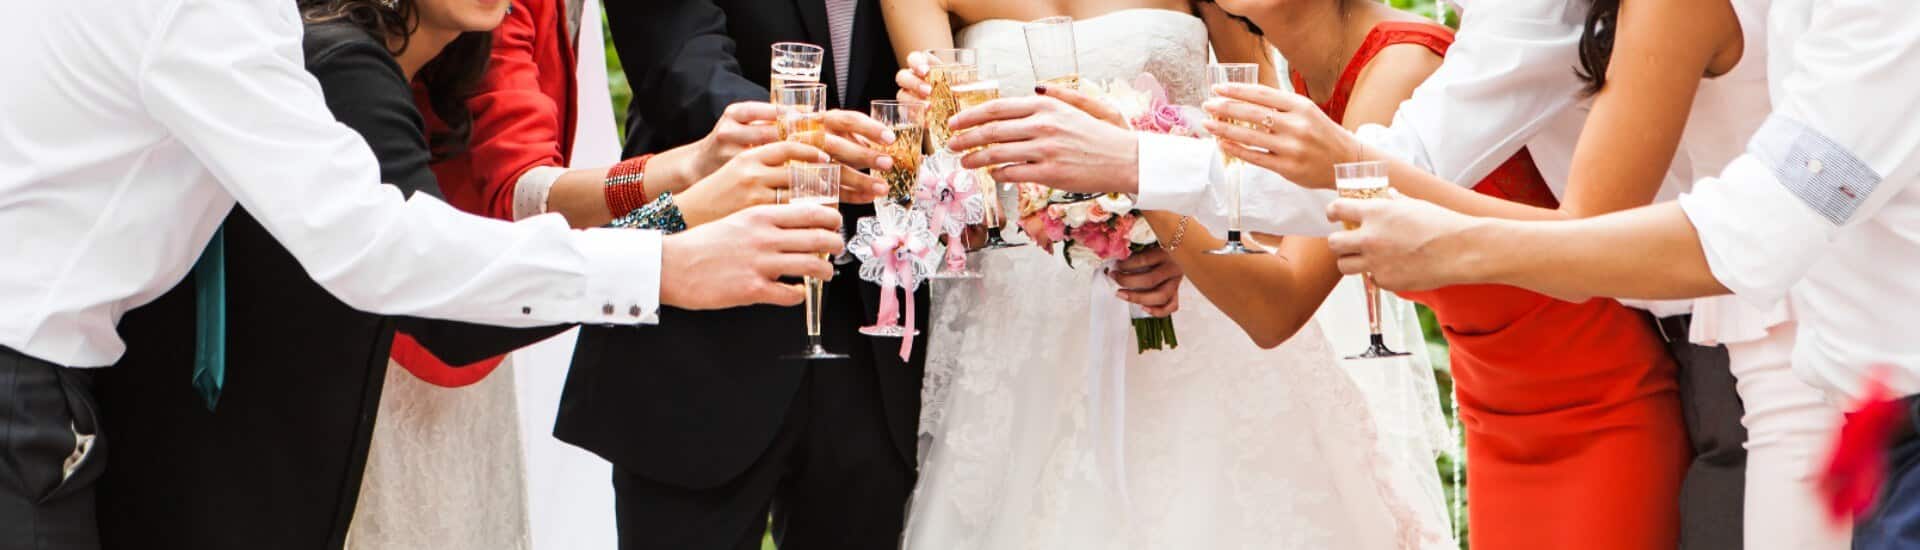 A bride and groom with friends toasting with champagne flutes